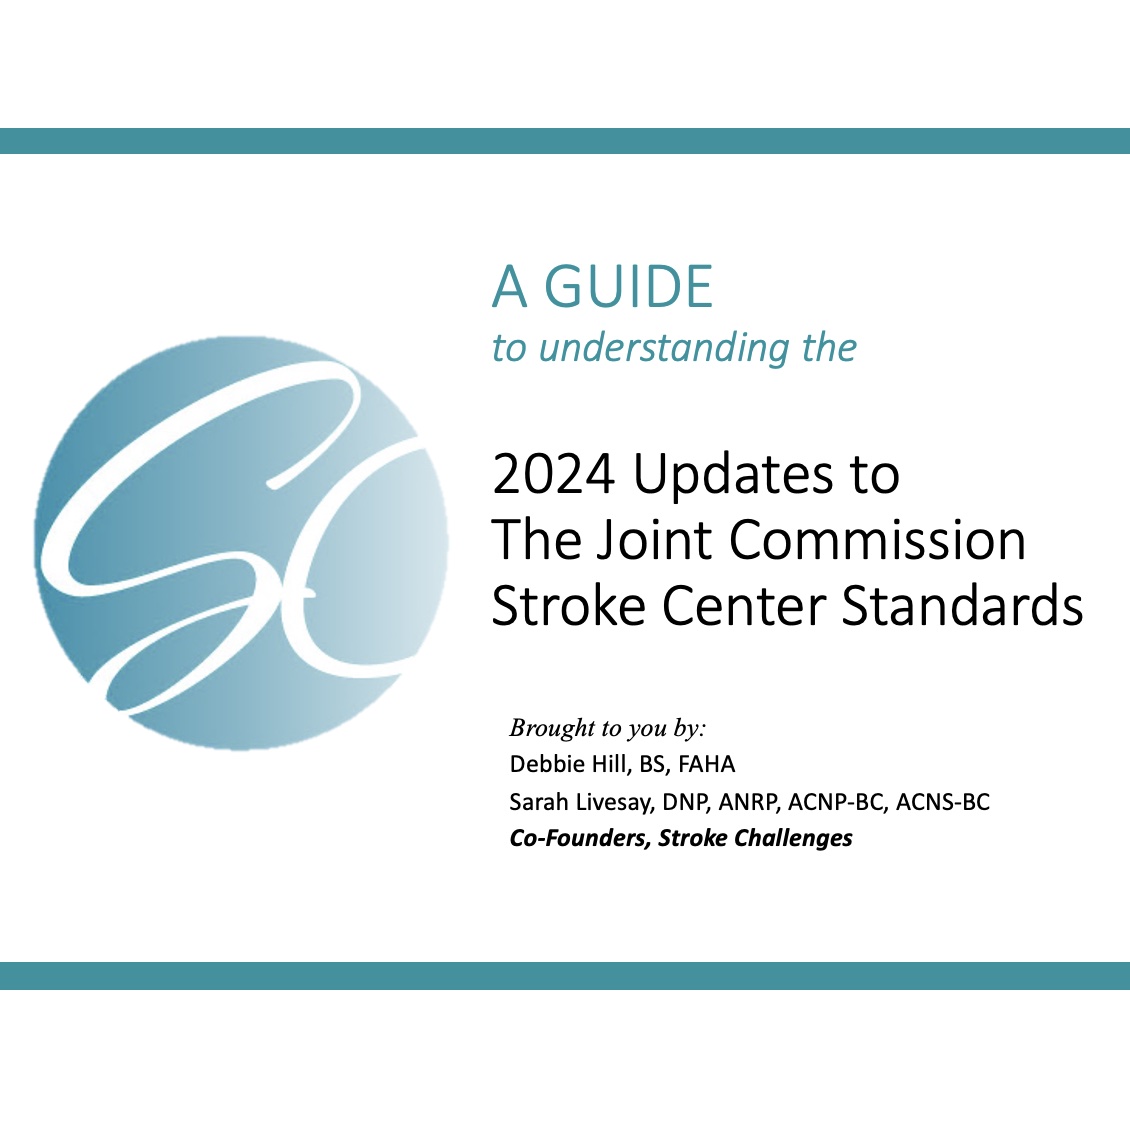 A Guide to Understanding the 2024 Joint Commission Stroke Center